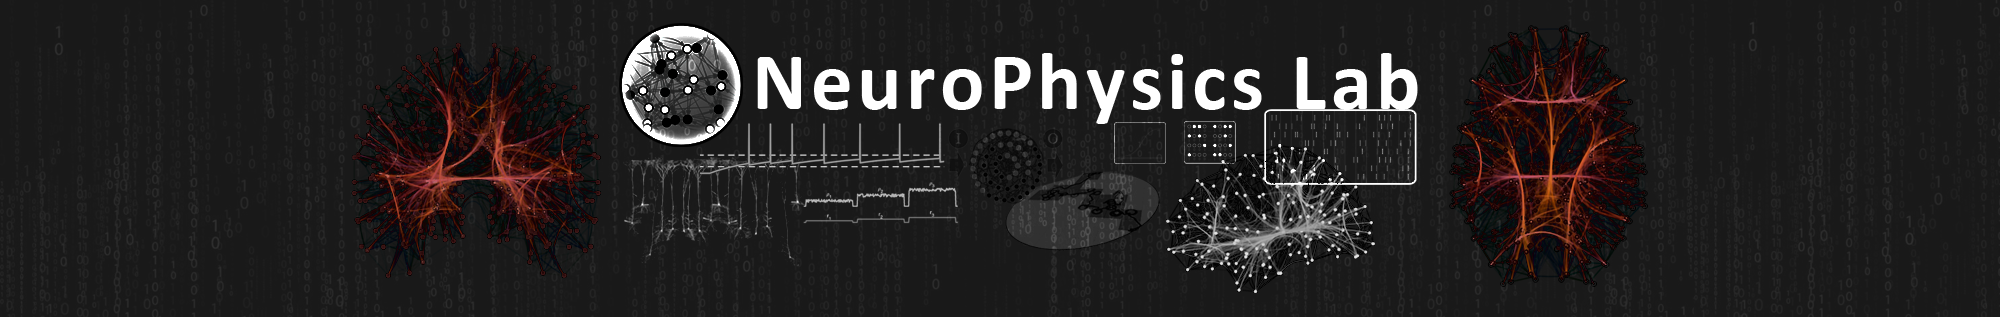 NeuroPhysics Lab: developing data-driven complex systems' theories